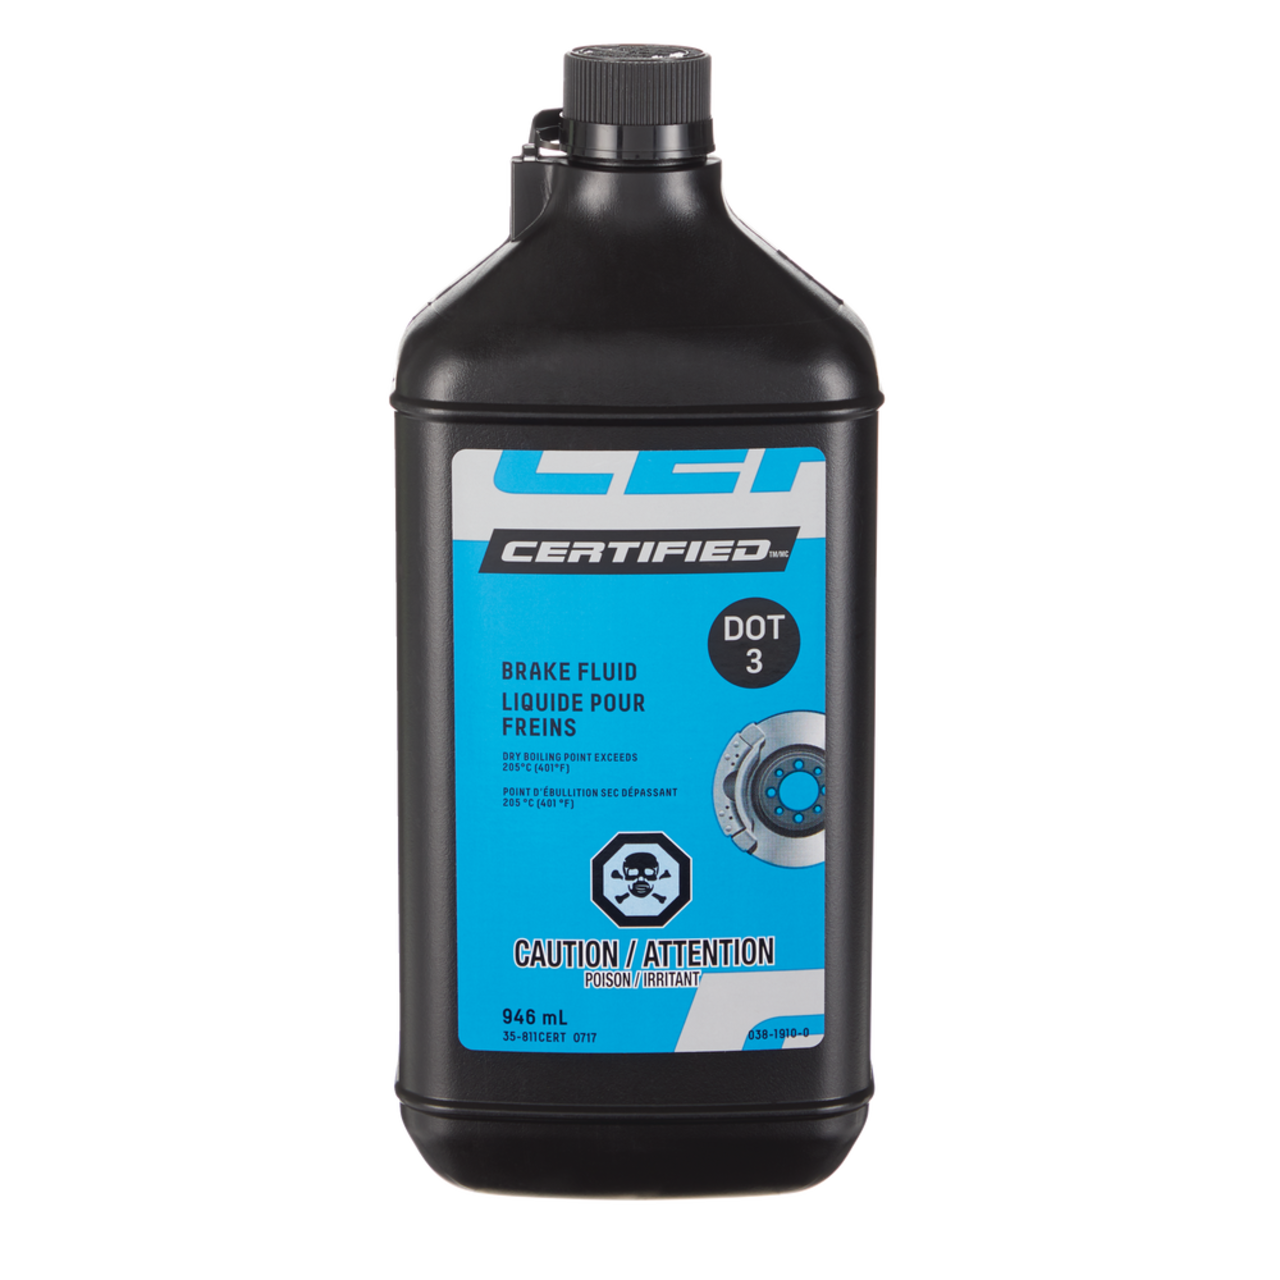 Certified DOT 3 Brake Fluid, More Options Available